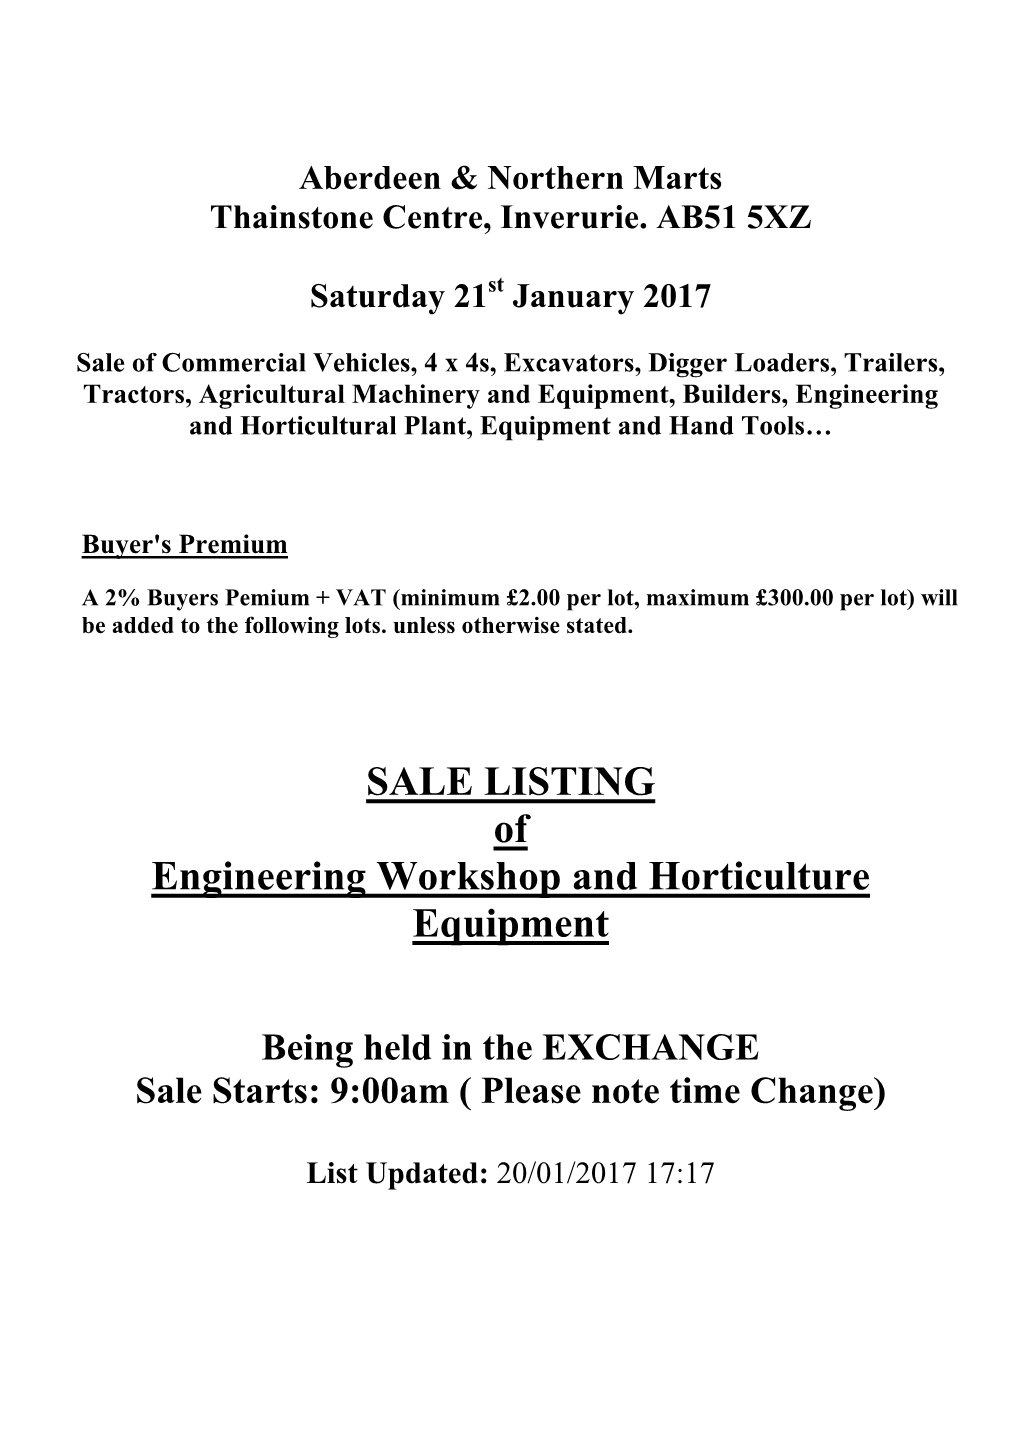 SALE LISTING of Engineering Workshop and Horticulture Equipment